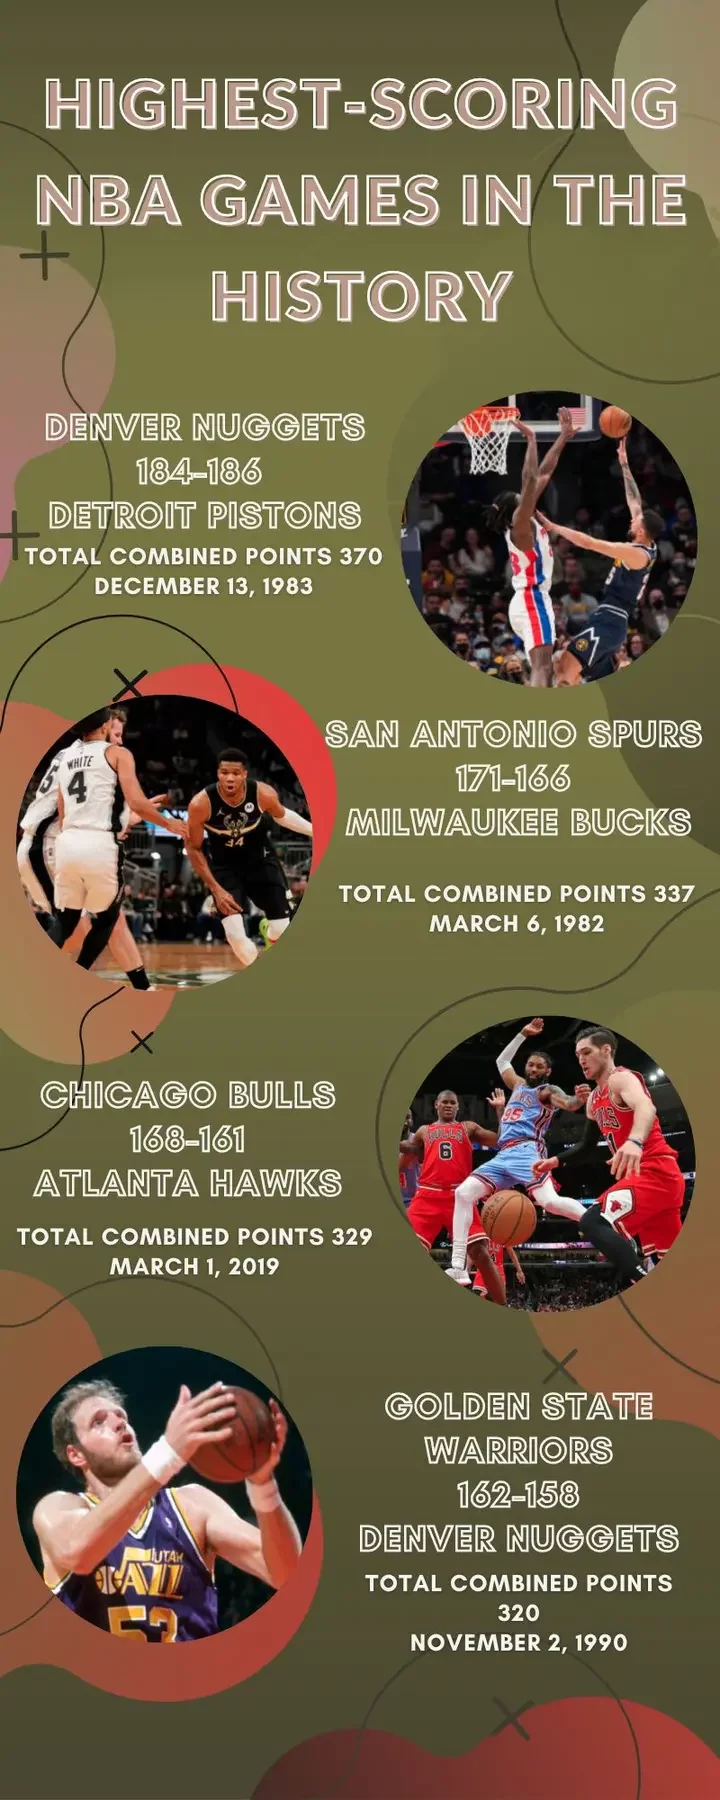 Highest-scoring NBA games in the history